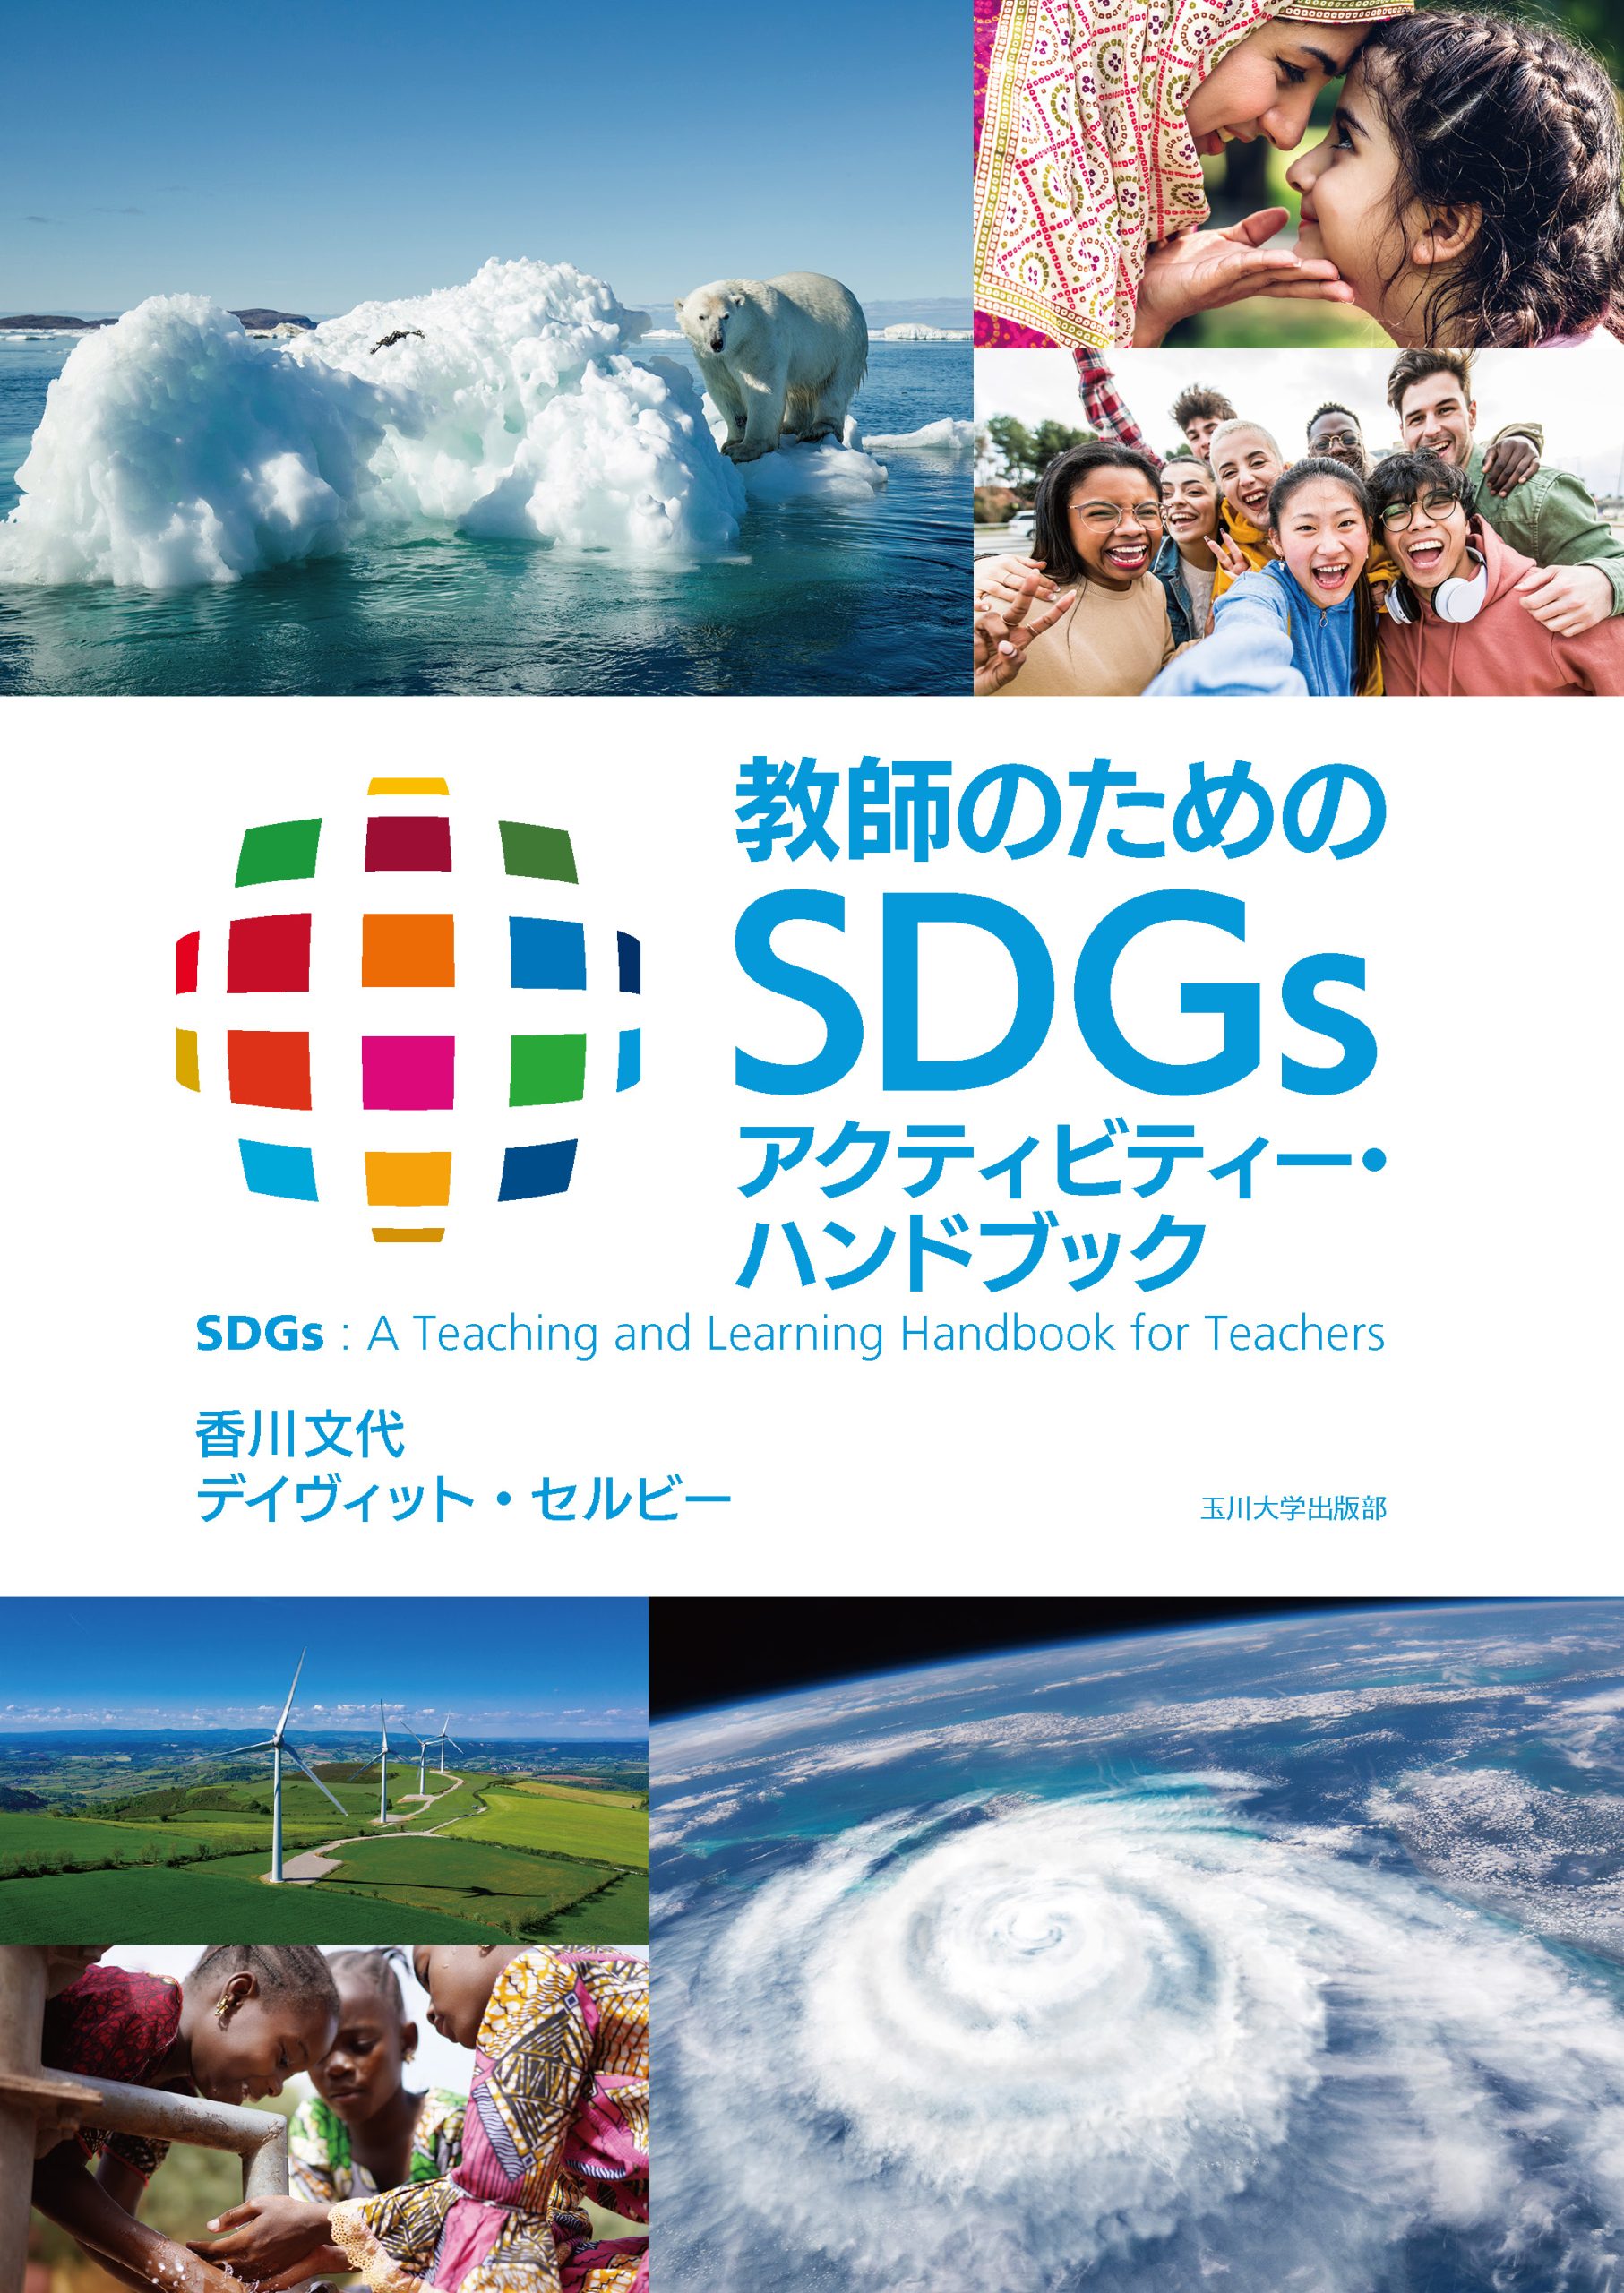 To be published shortly! SDGs: A Teaching and Learning Handbook for Teachers